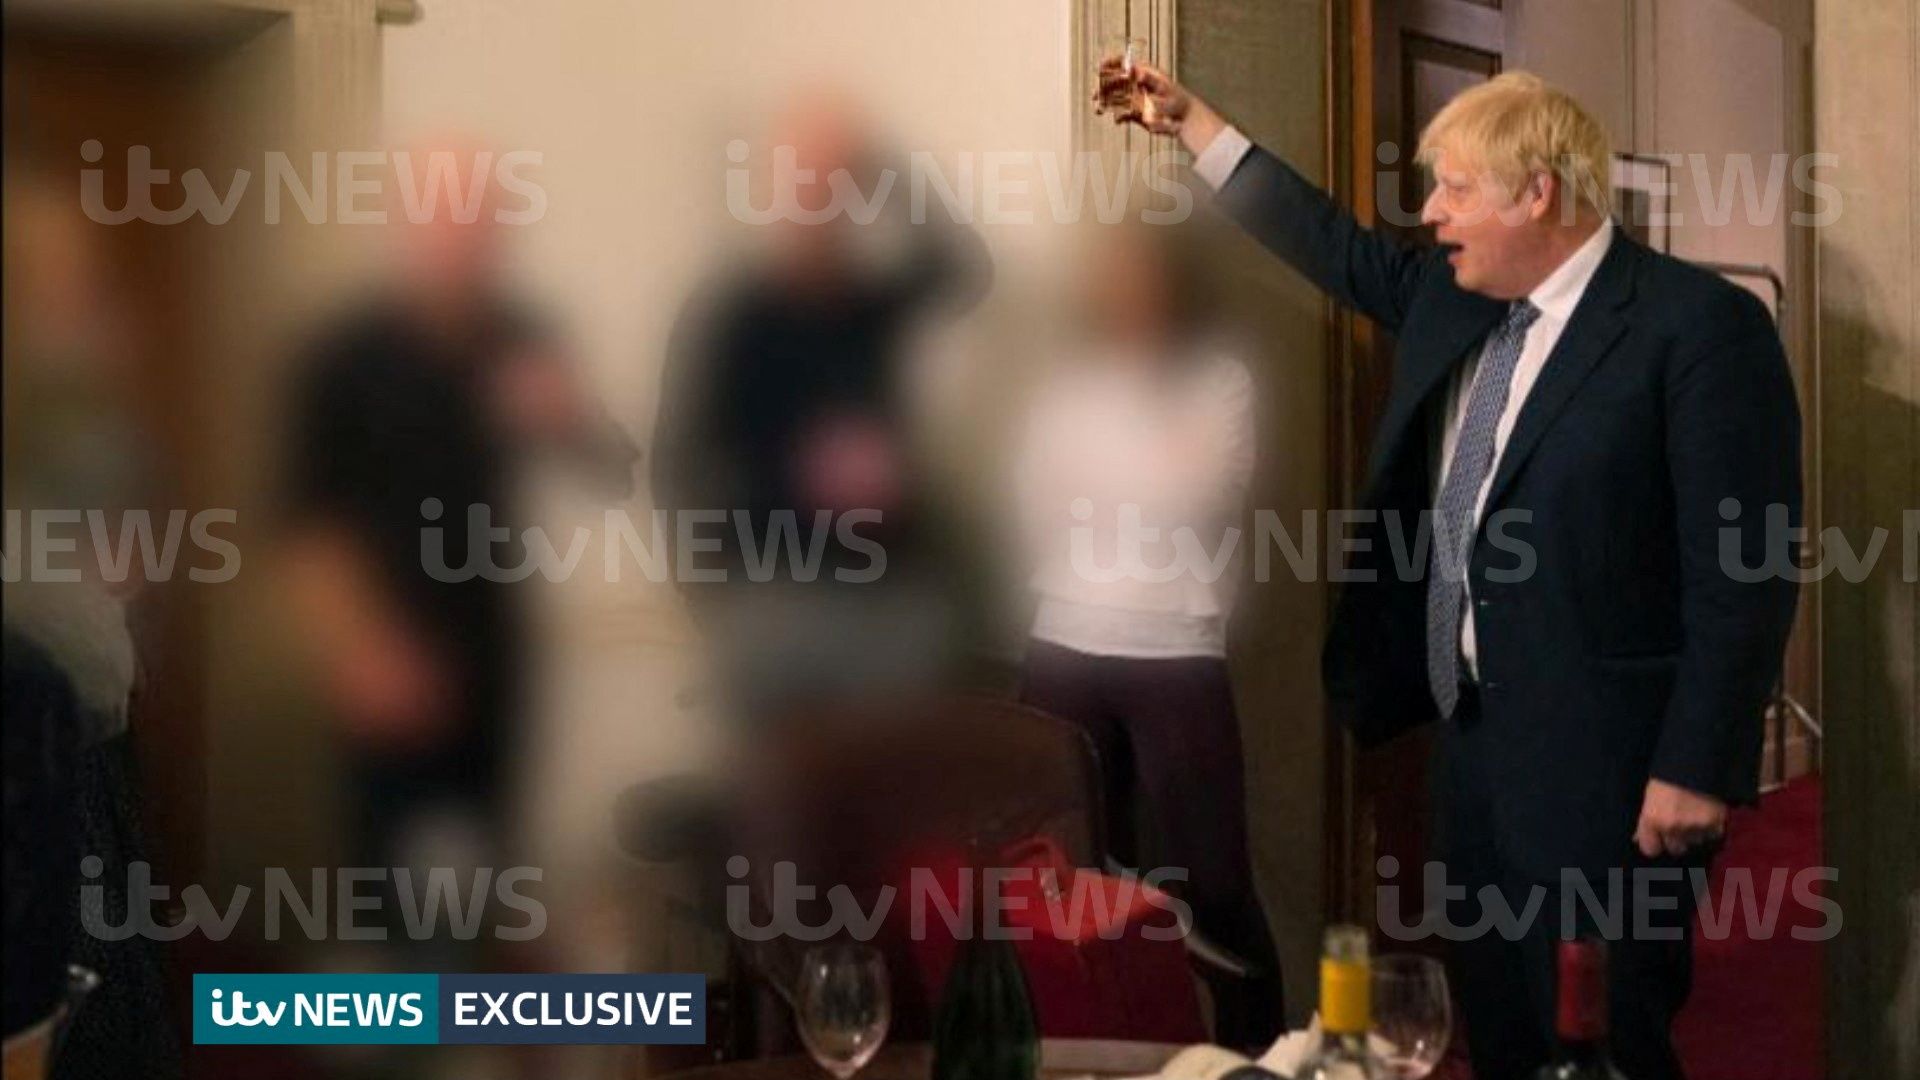 A handout picture shows British Prime Minister Boris Johnson raising a glass during a party at Downing Street, amid the coronavirus disease (COVID-19) pandemic in London, Britain November 13, 2020. Picture taken November 13, 2020. ITV News/Handout via REUTERS THIS IMAGE HAS BEEN SUPPLIED BY A THIRD PARTY. MANDATORY CREDIT. NO RESALES. NO ARCHIVES. BLURRING AND WATERMARKS FROM SOURCE  3TP MNDTY NARCH/NARCH30